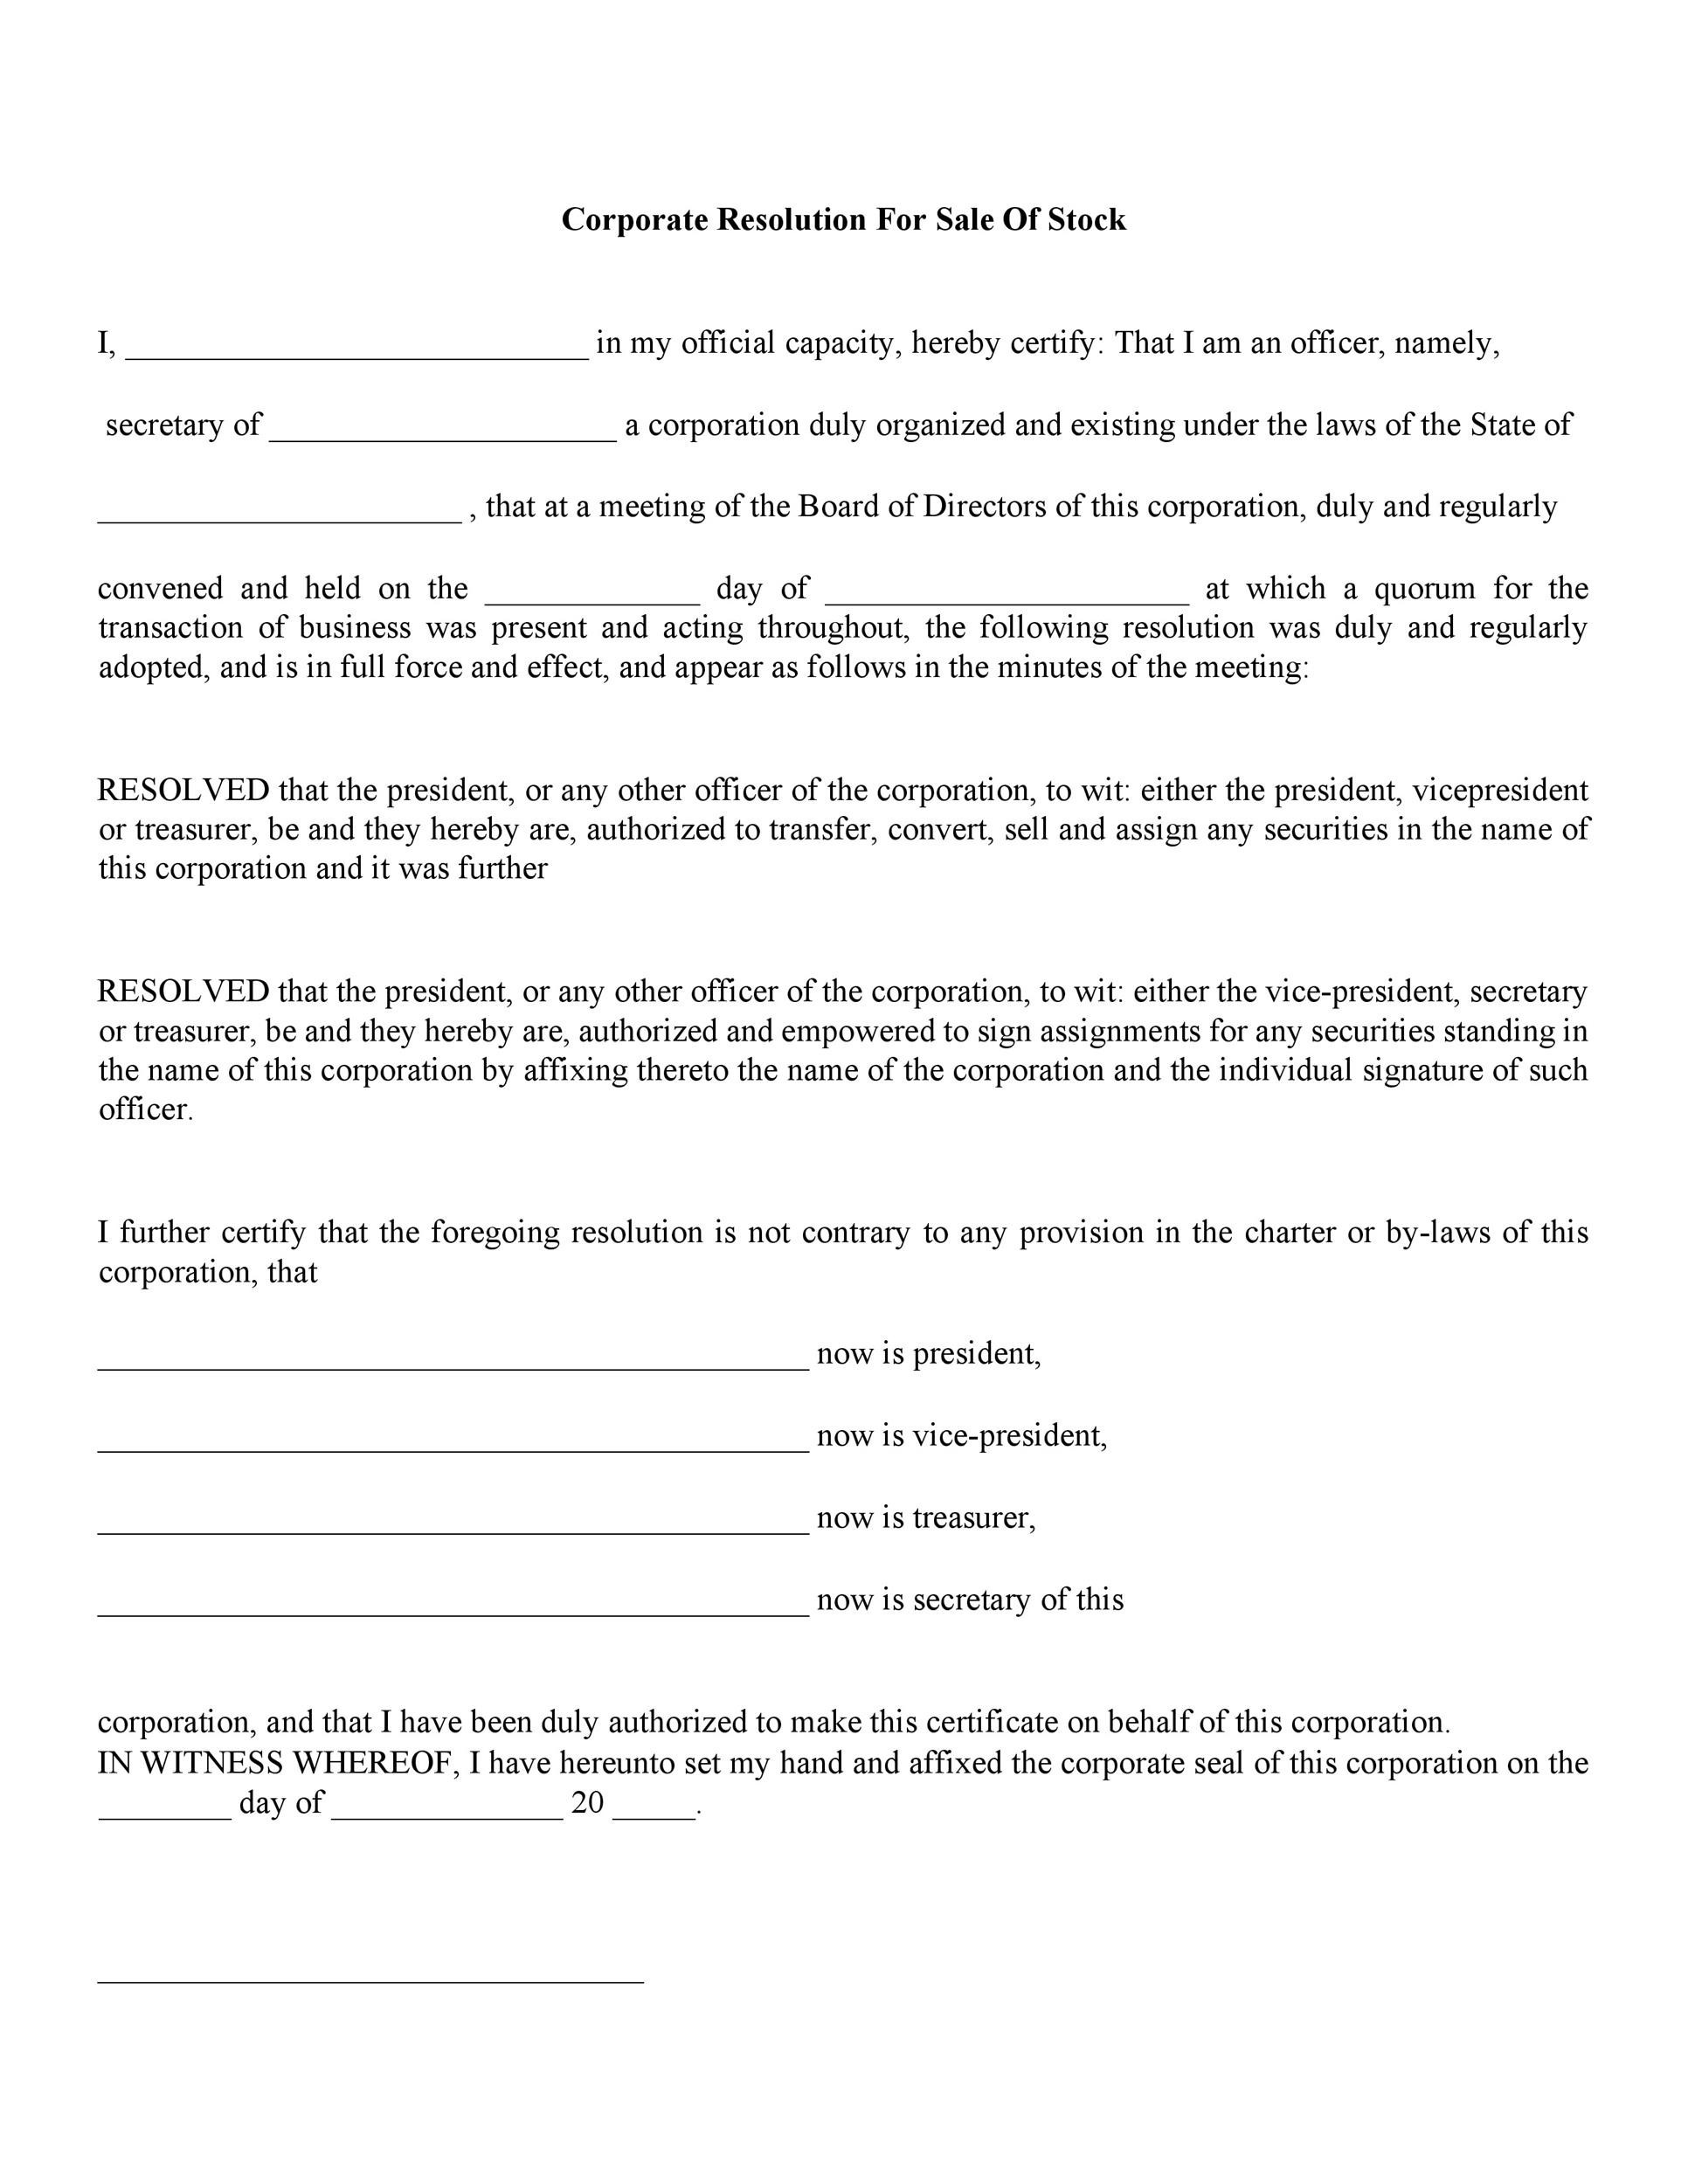 Free Corporate Resolution Form 16